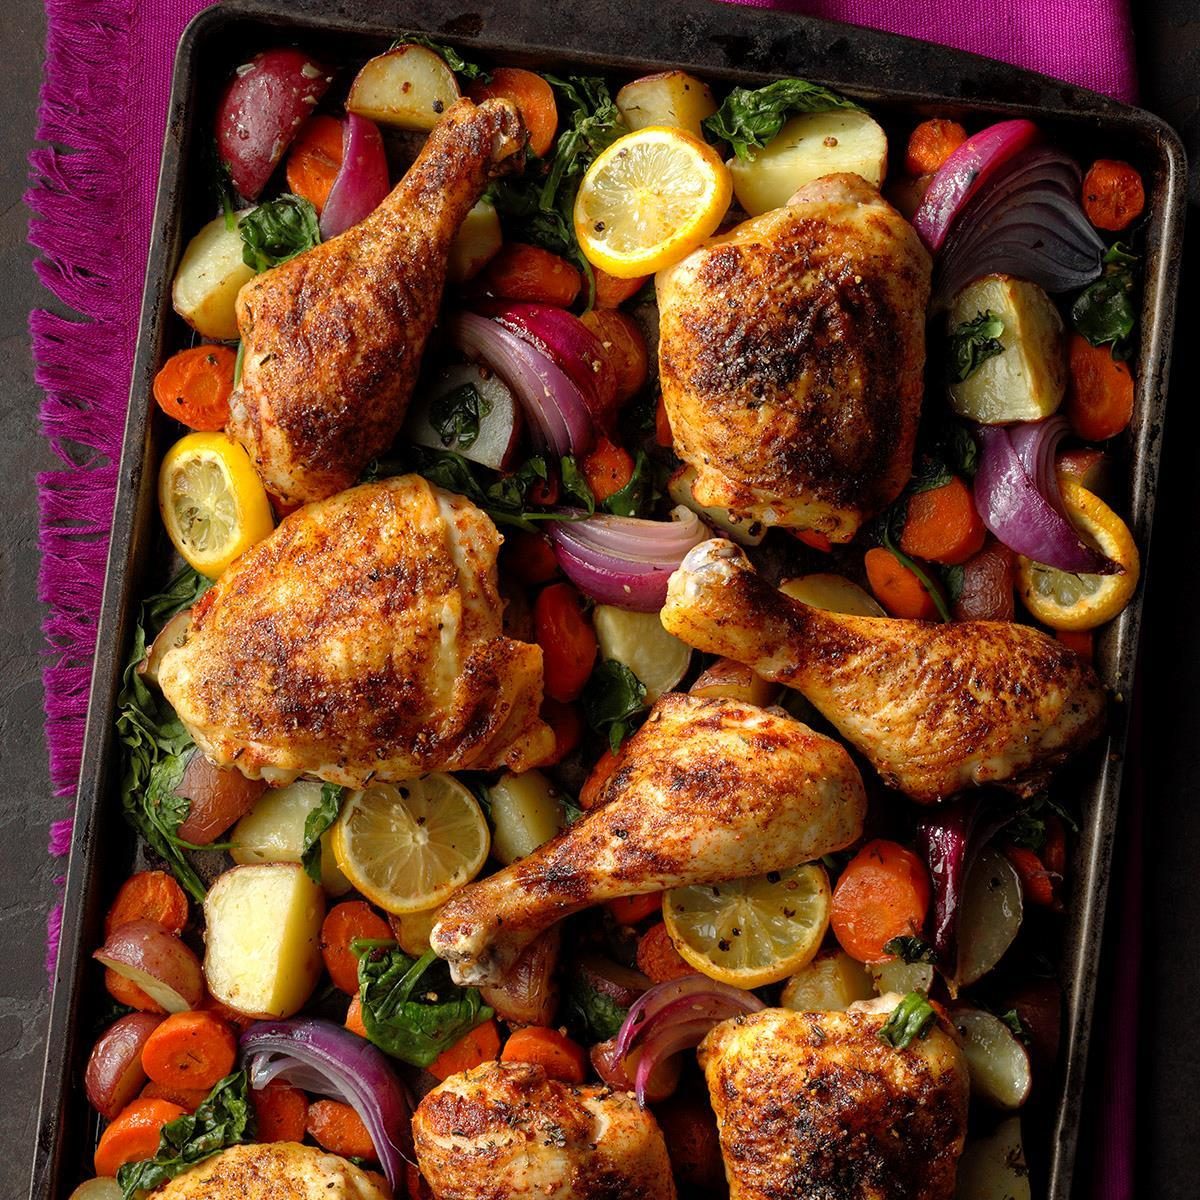 One Pan Roasted Chicken Vegetables Exps Opbz18 232860 B06 28 1b 16